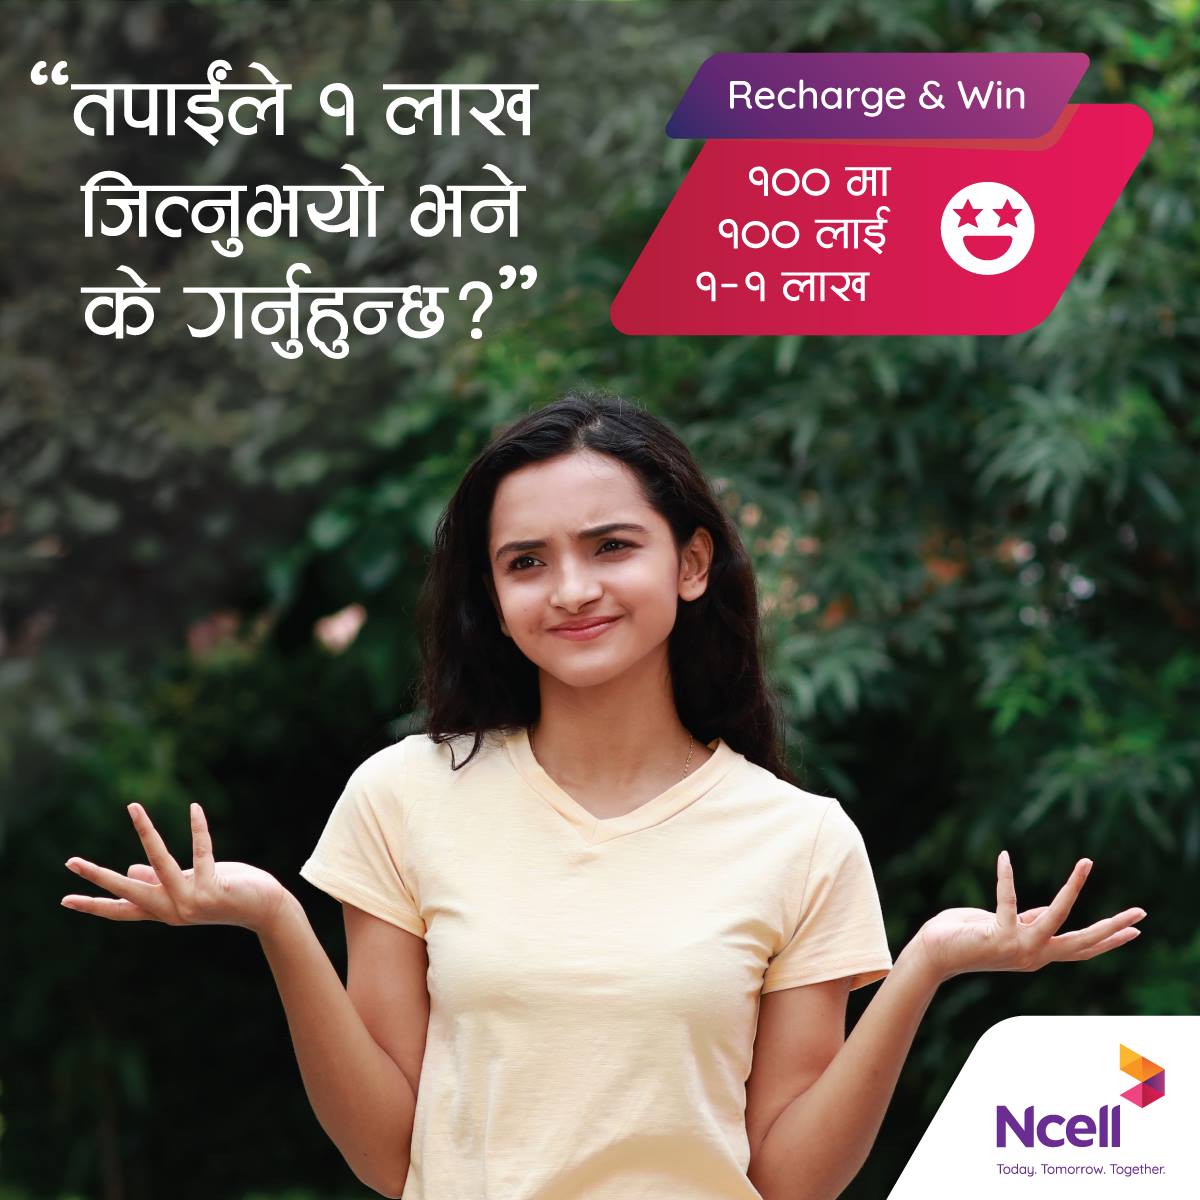 Ncell brings ‘Recharge and Win’ offer